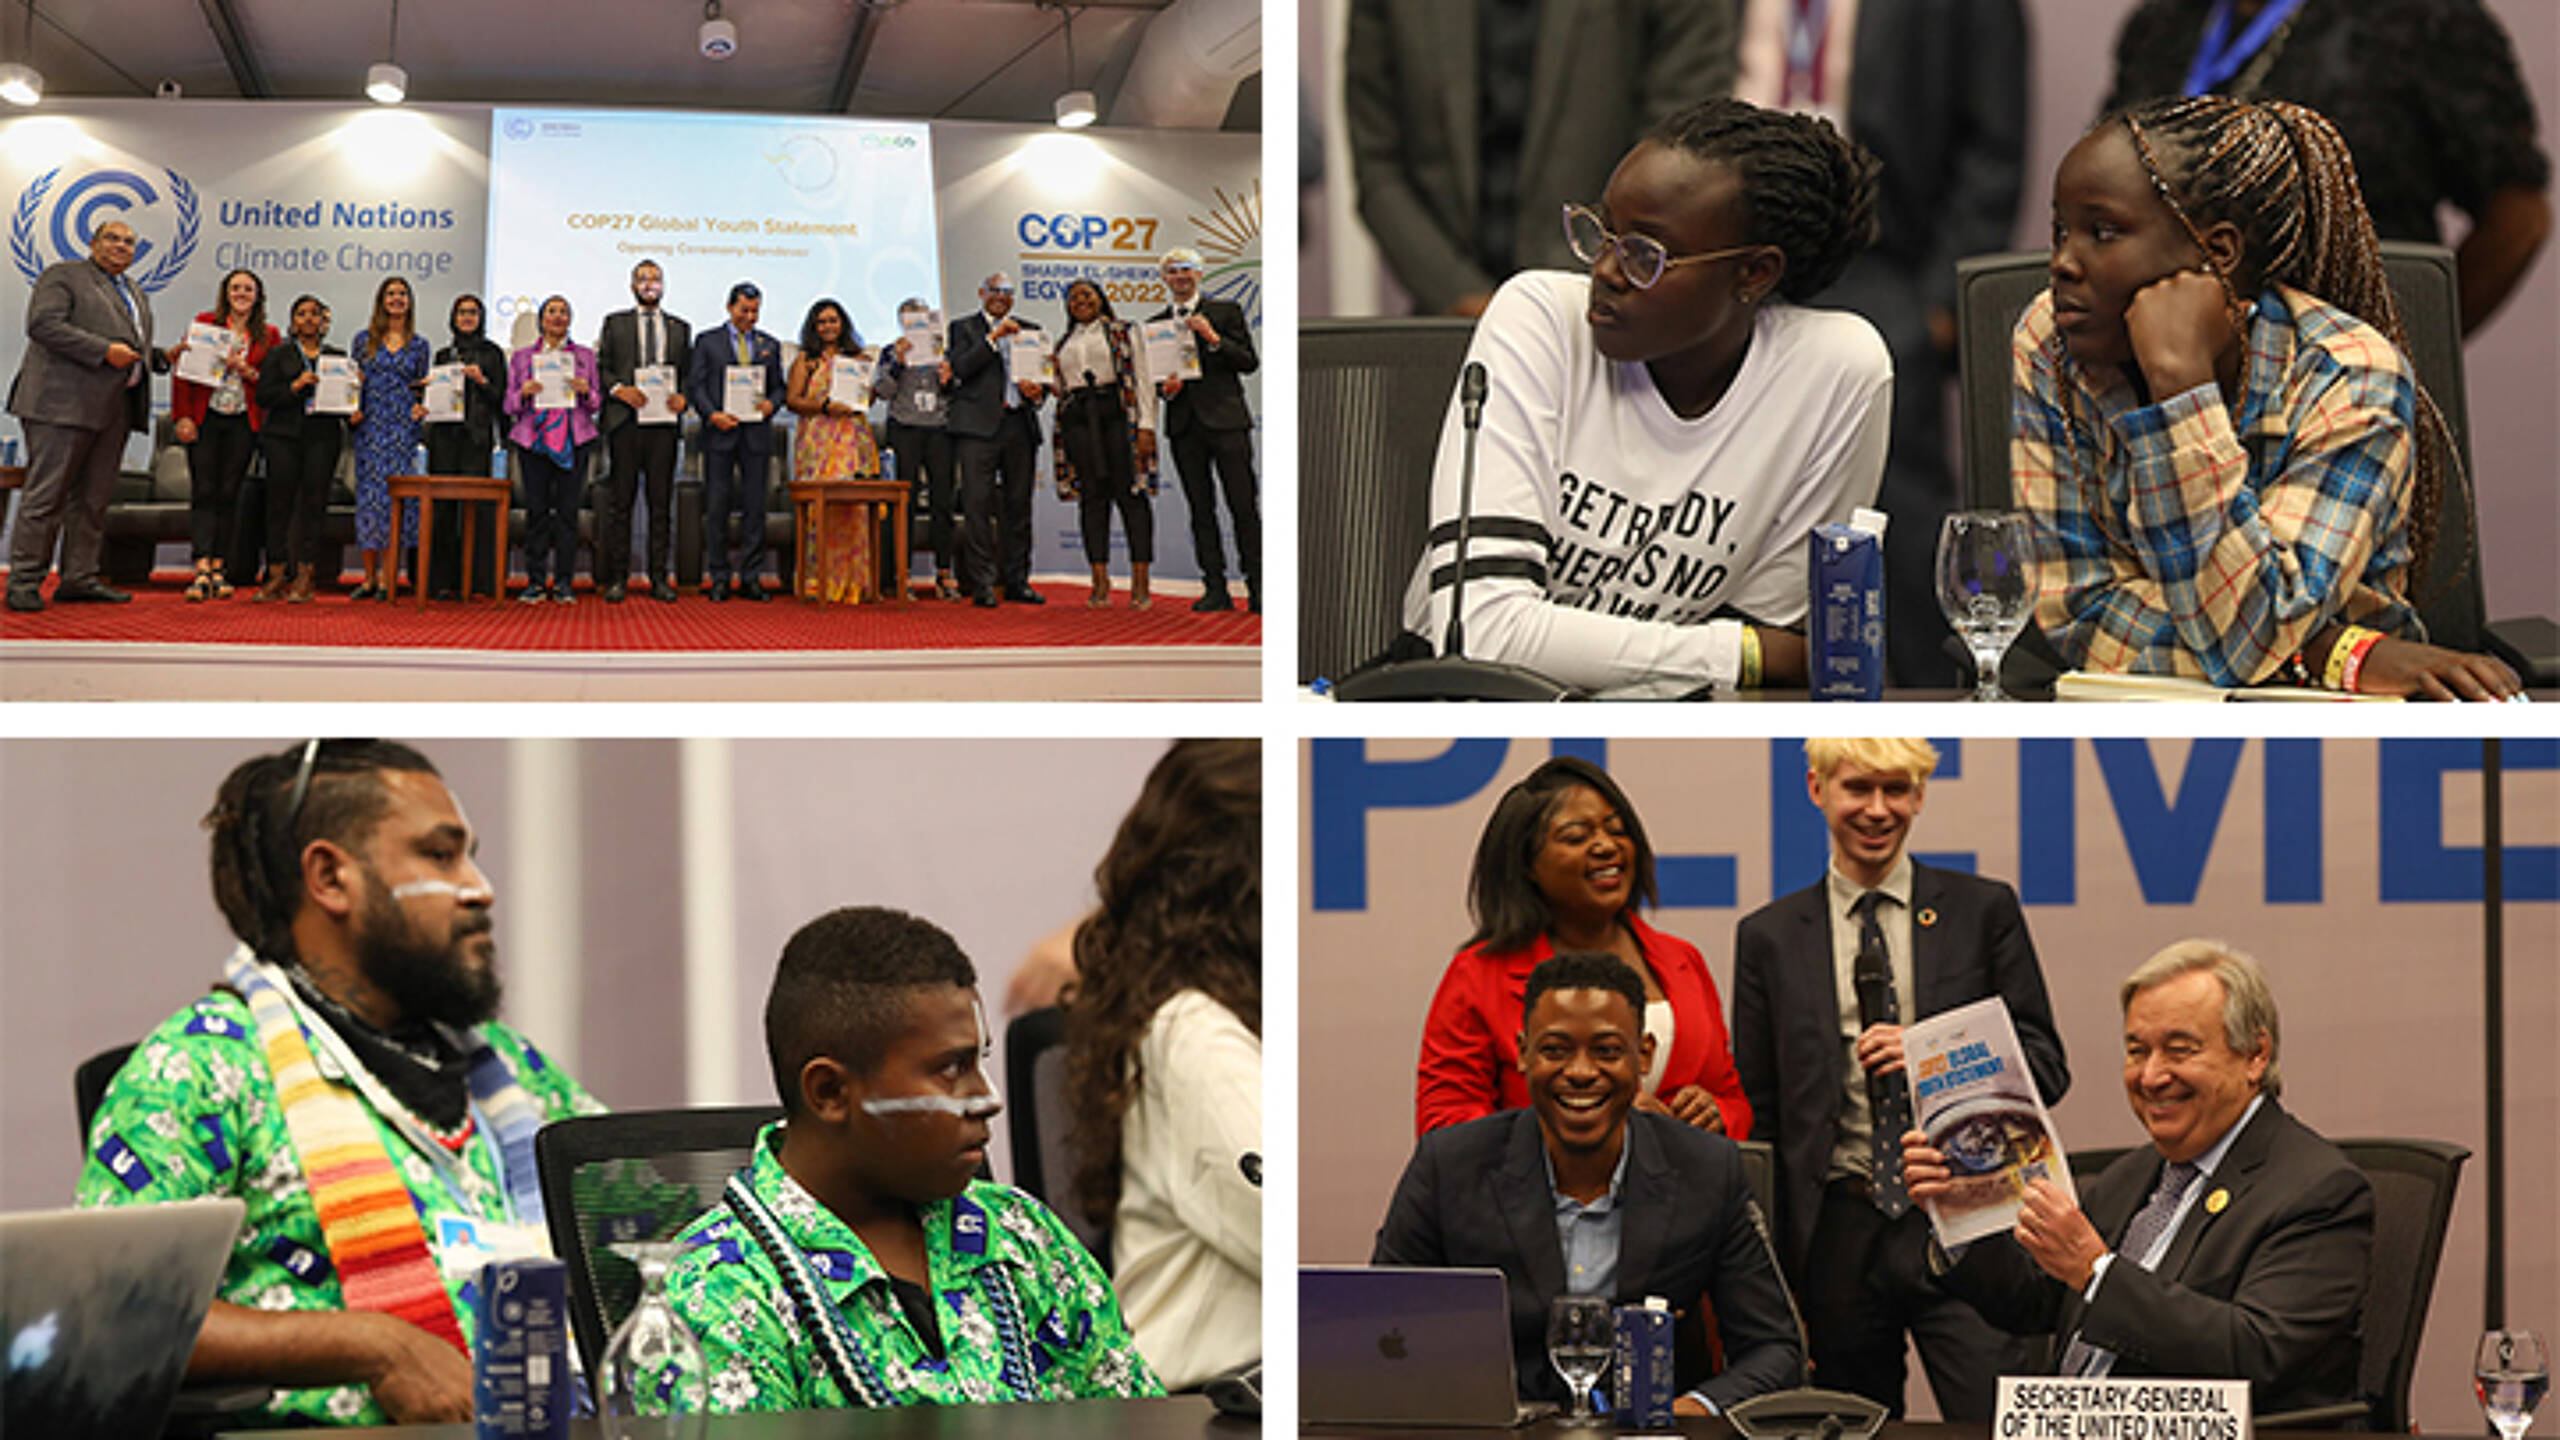 Global Youth Statements and resiliency races: Six things you need to know from science and youth day at COP27